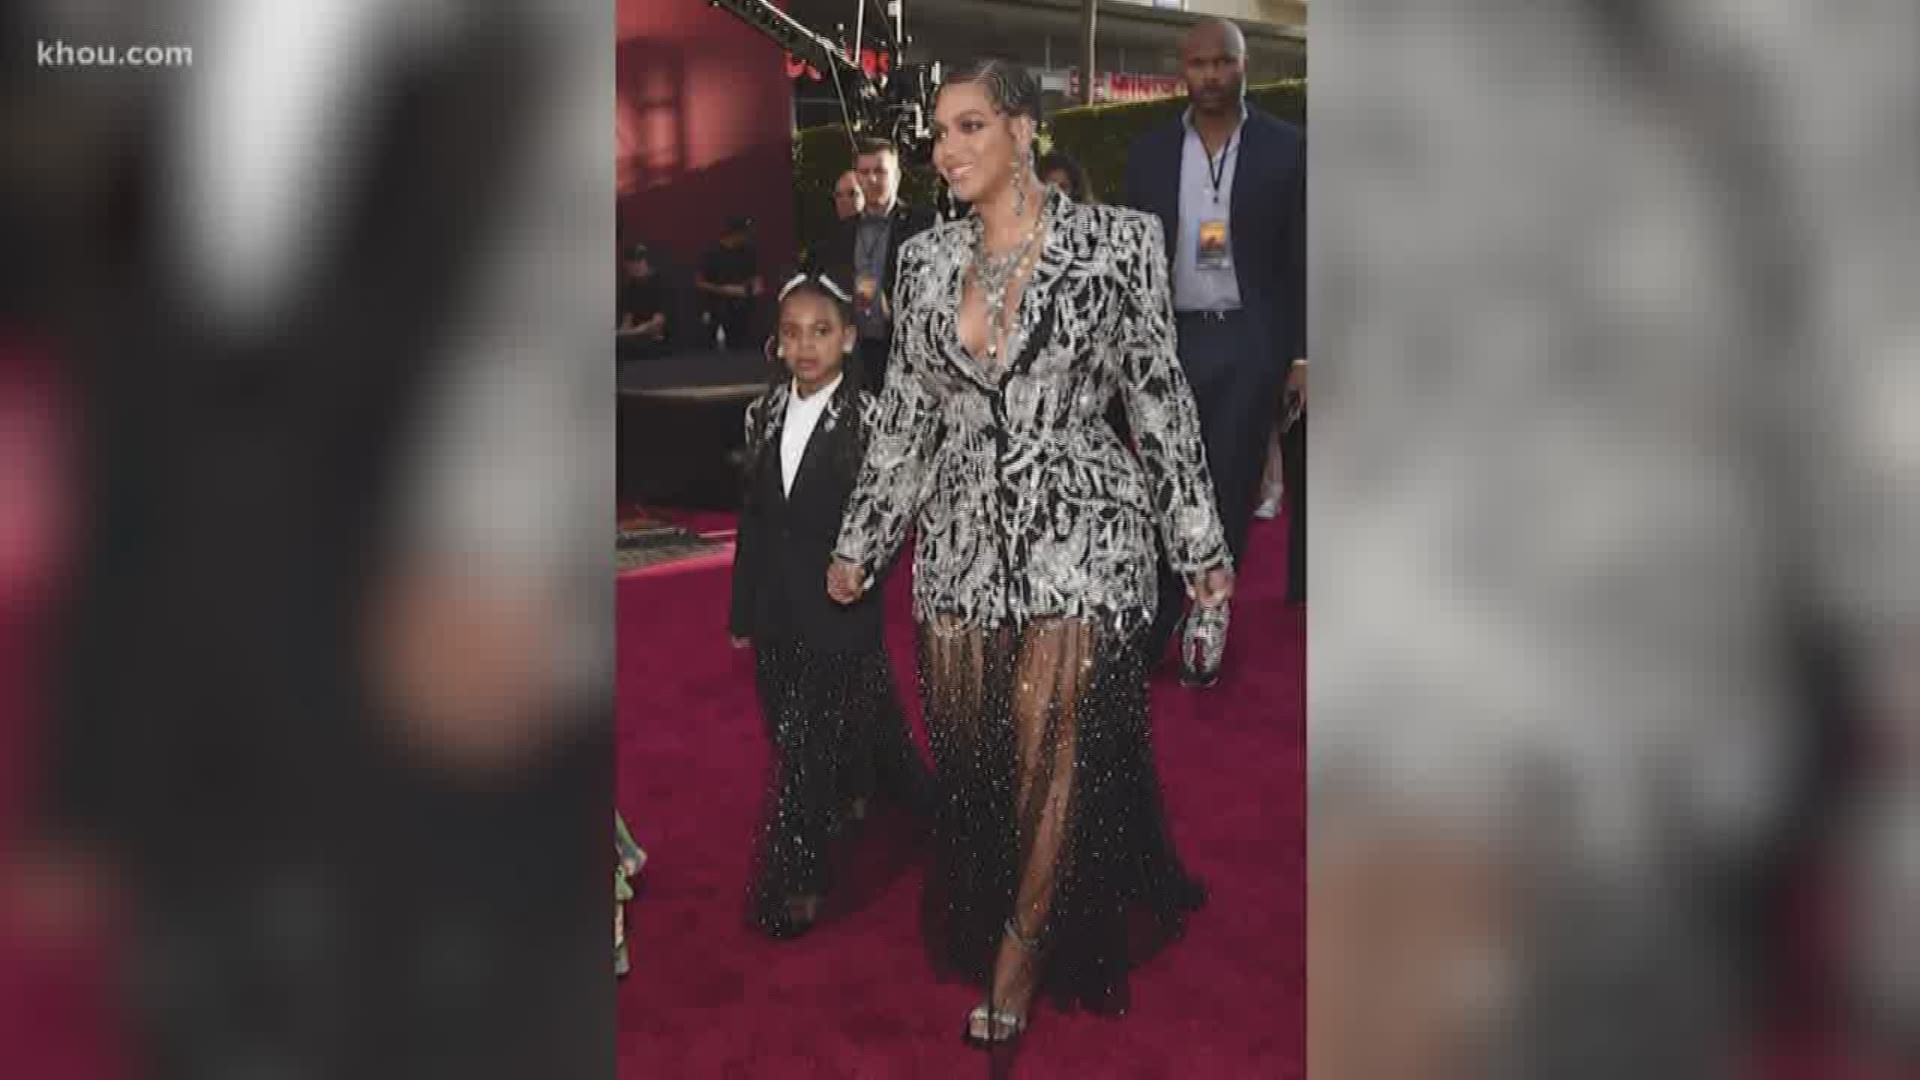 Blue Ivy won the Ashford and Simpson Songwriter's Award at the Soul Train Awards for co-writing her mom's hit 'Brown Skin Girl."